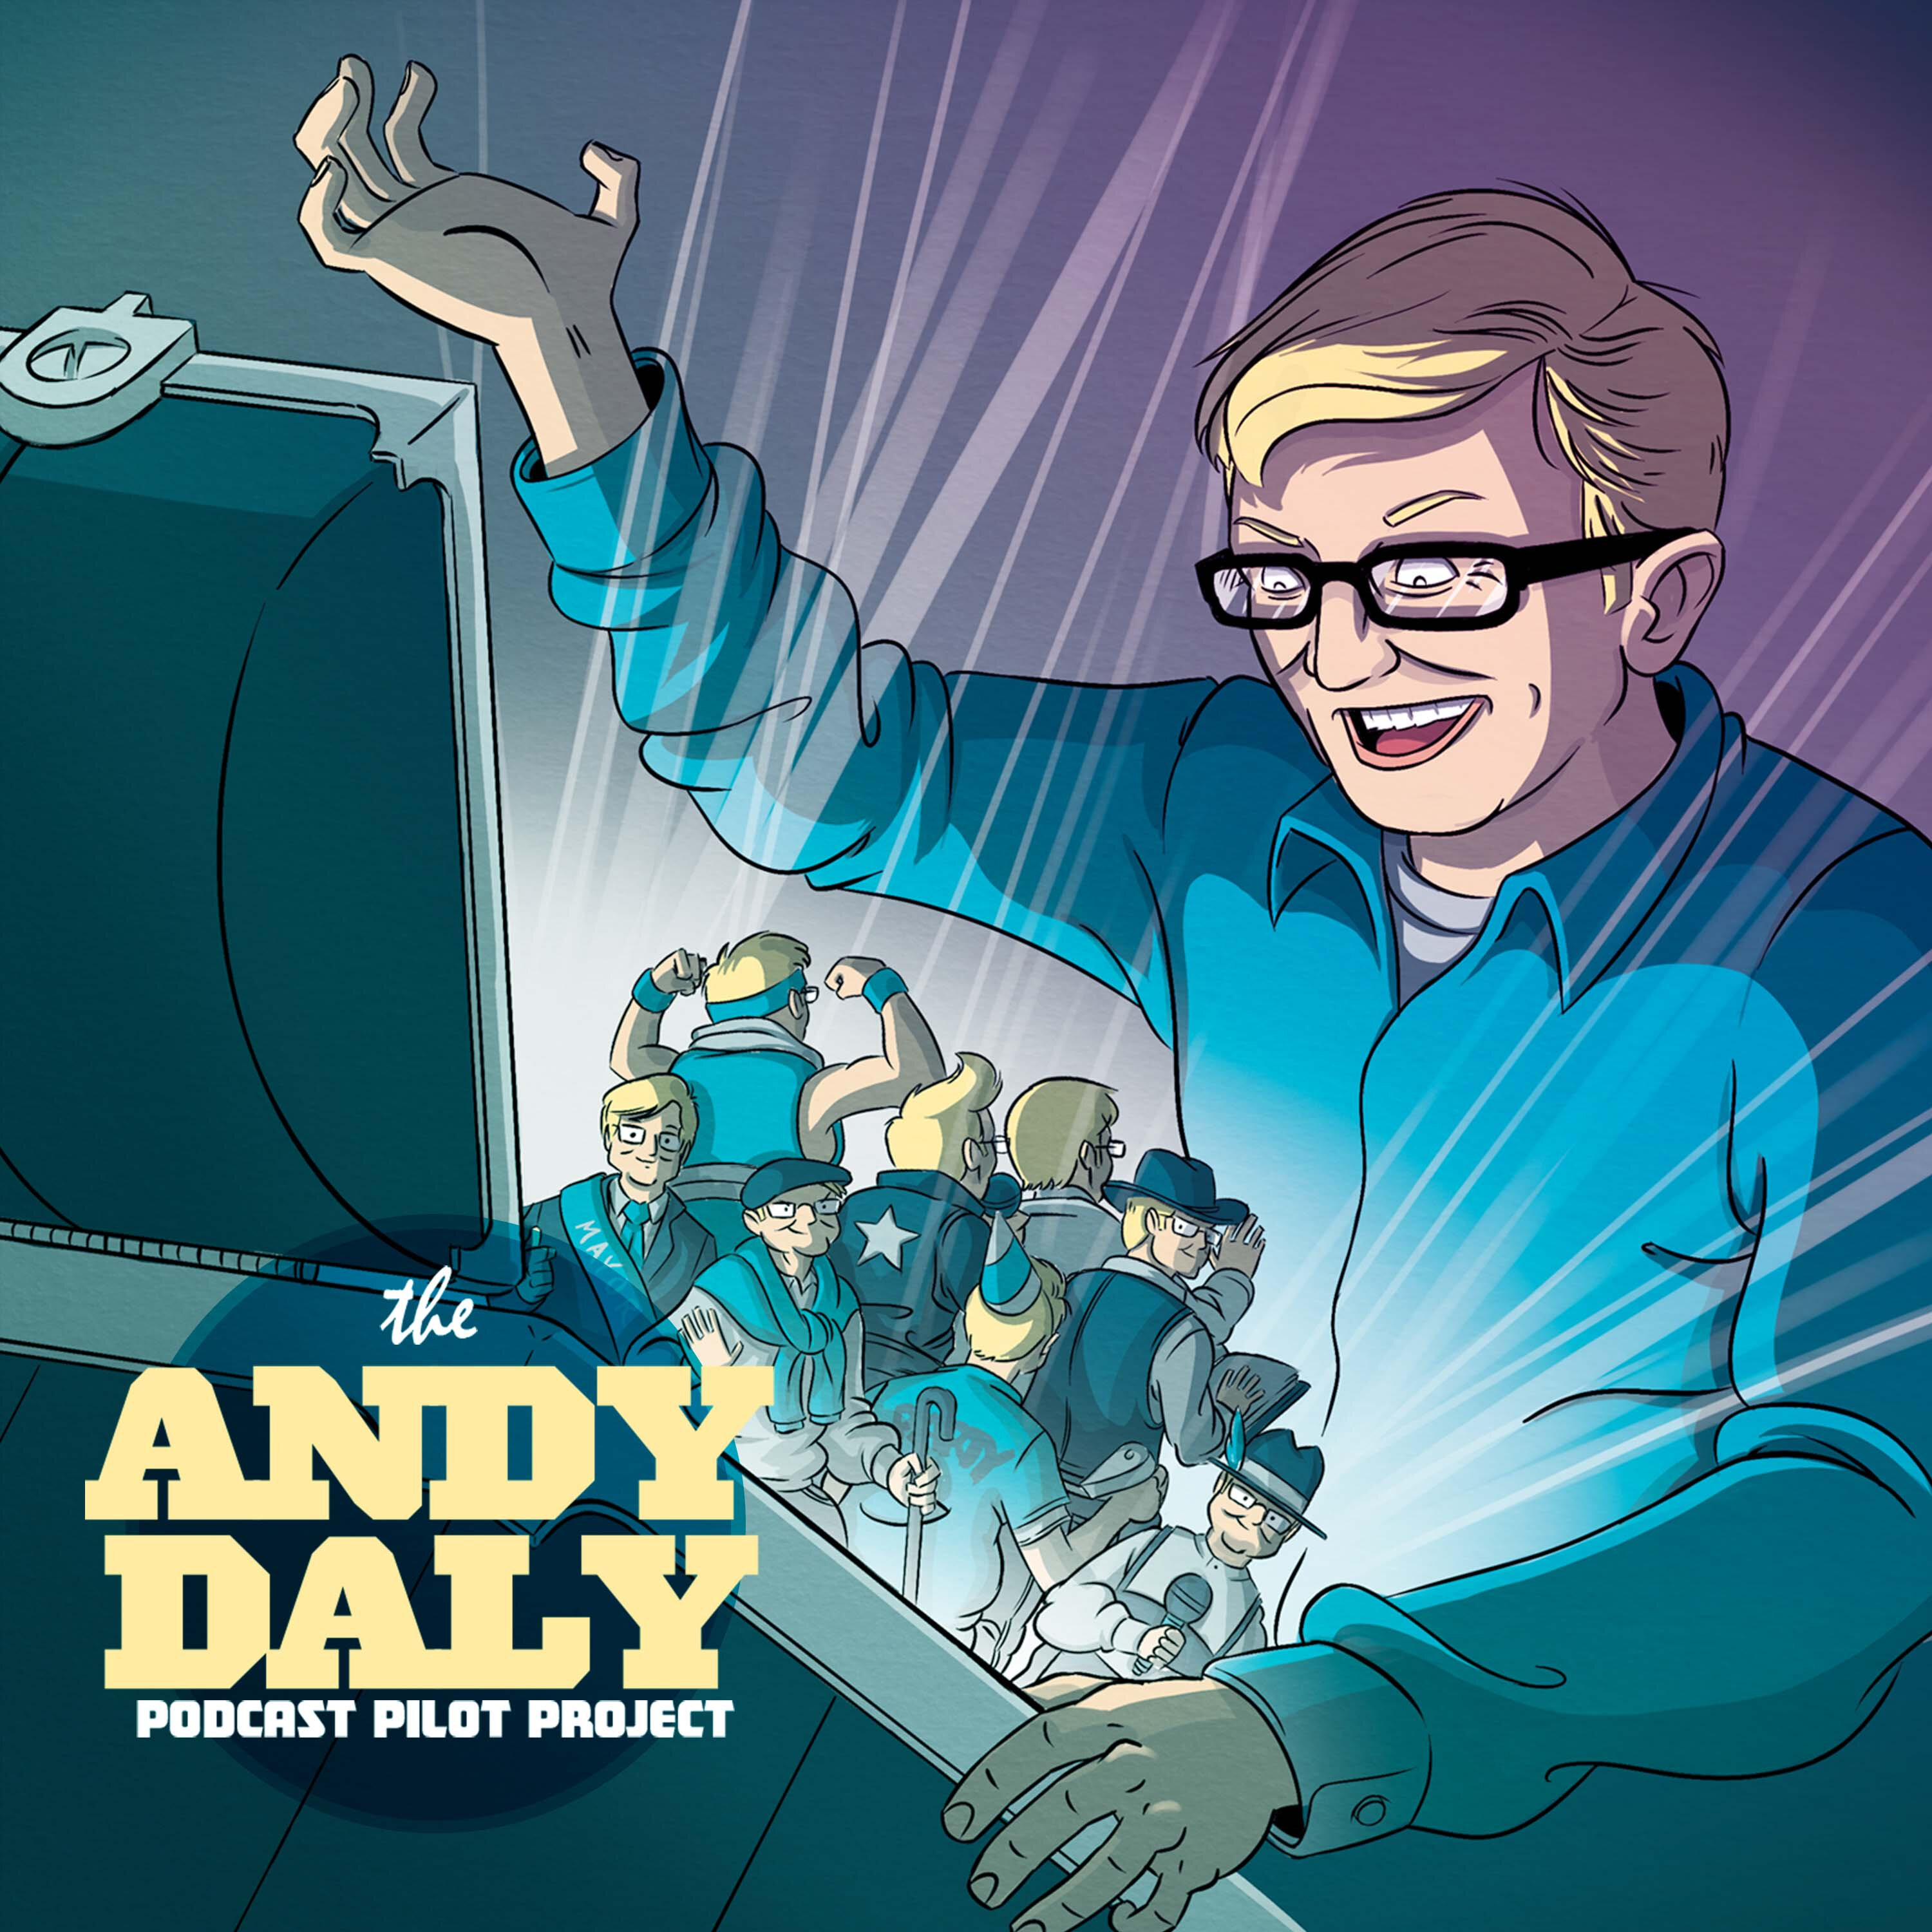 Re-Release: The Andy Daly Podcast Pilot Project Season 1, Episode 1: “The Wit and Wisdom of The West with Dalton Wilcox”